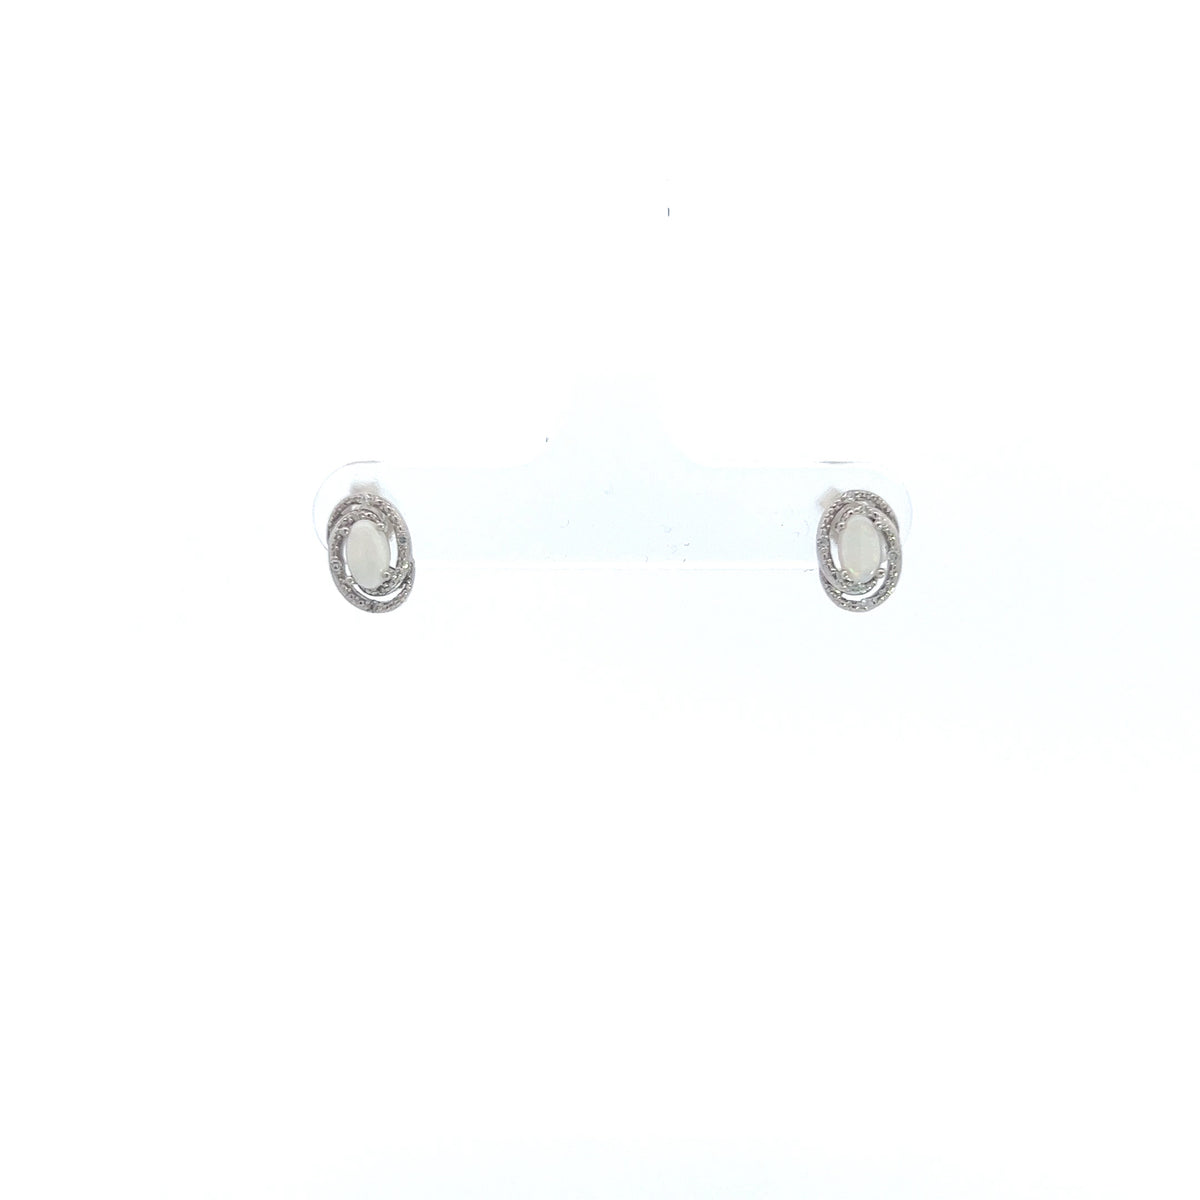 925 Sterling Silver 5 x 3mm Opal and 0.036cttw Diamond Stud Earrings with Butterfly Backs - 6mm x 9mm